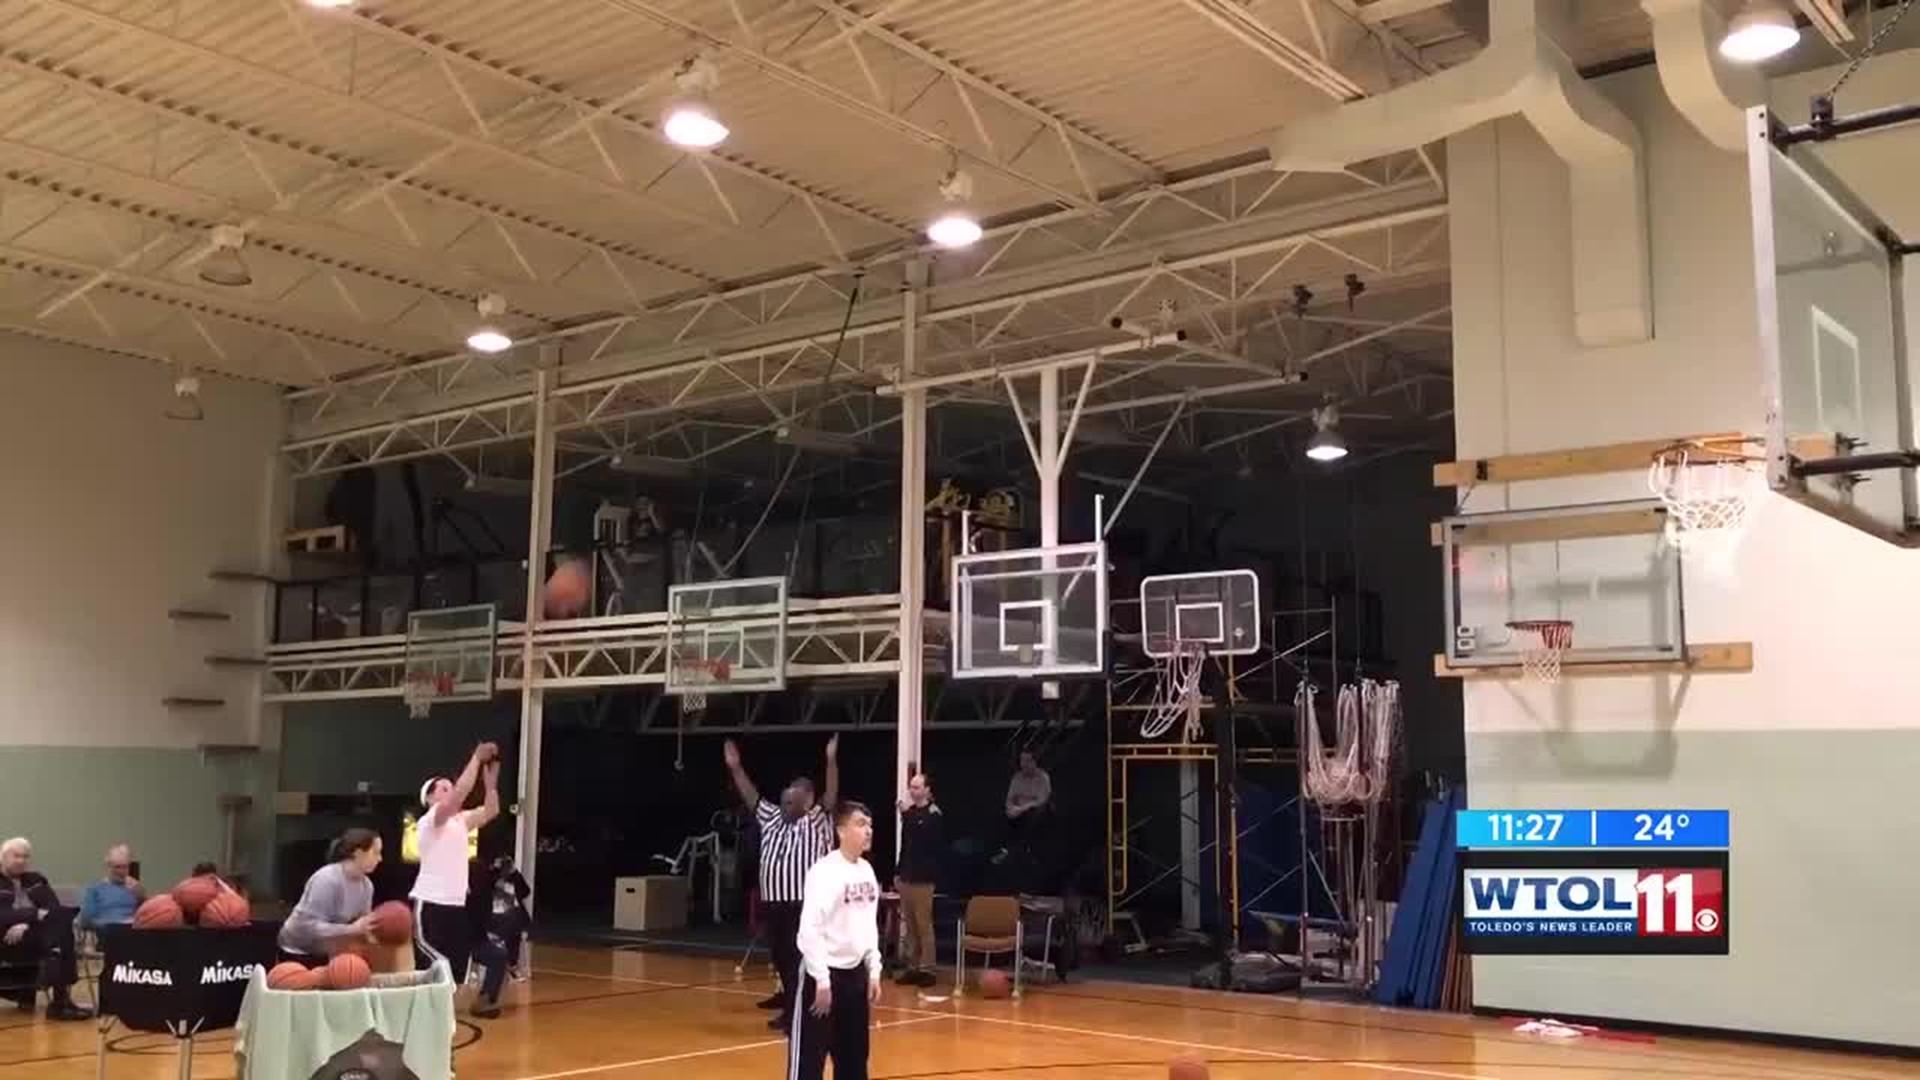 Local man breaks Guiness world record of three-pointers in one minute